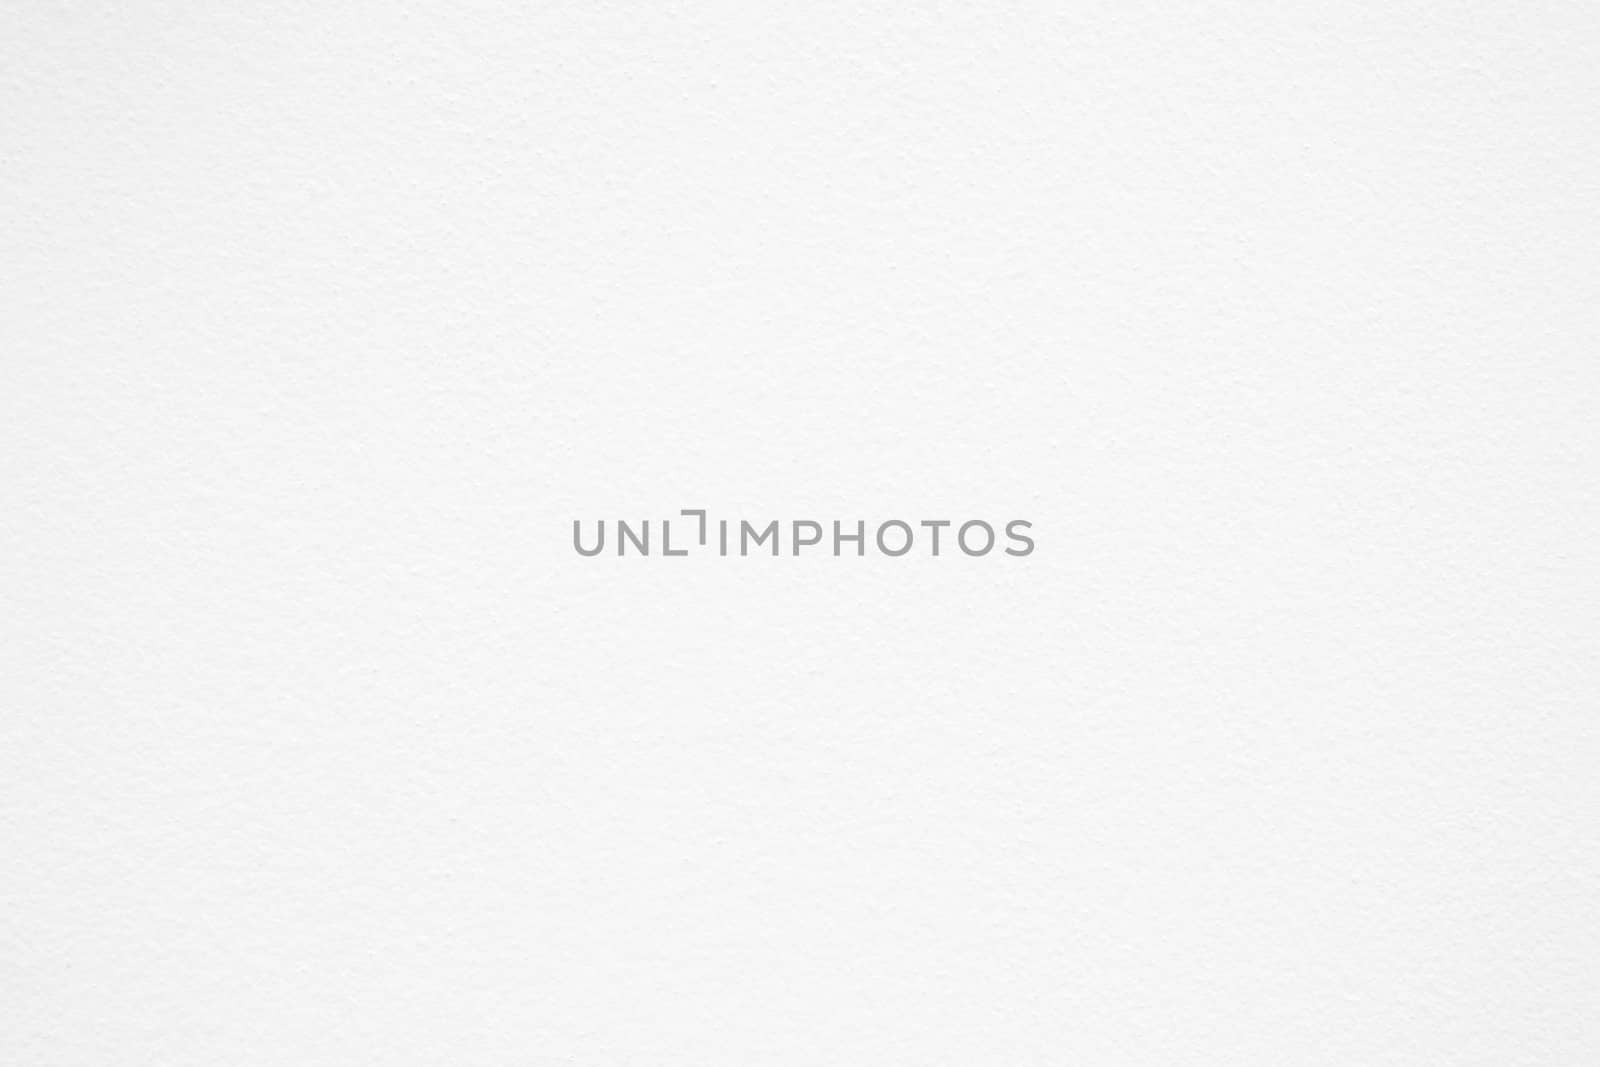 White Concrete Wall Background. by mesamong